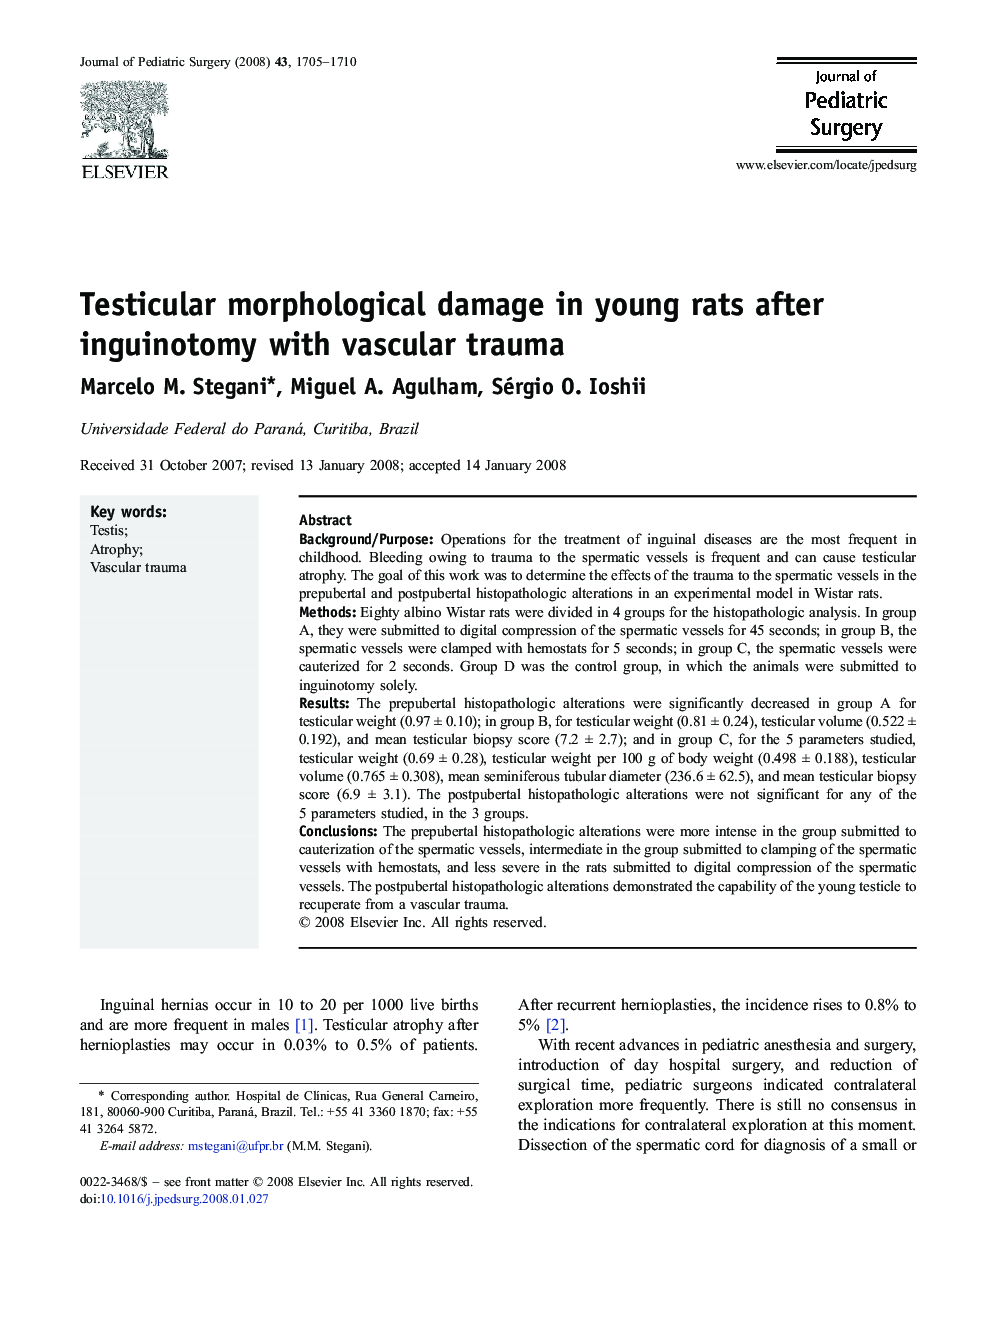 Testicular morphological damage in young rats after inguinotomy with vascular trauma